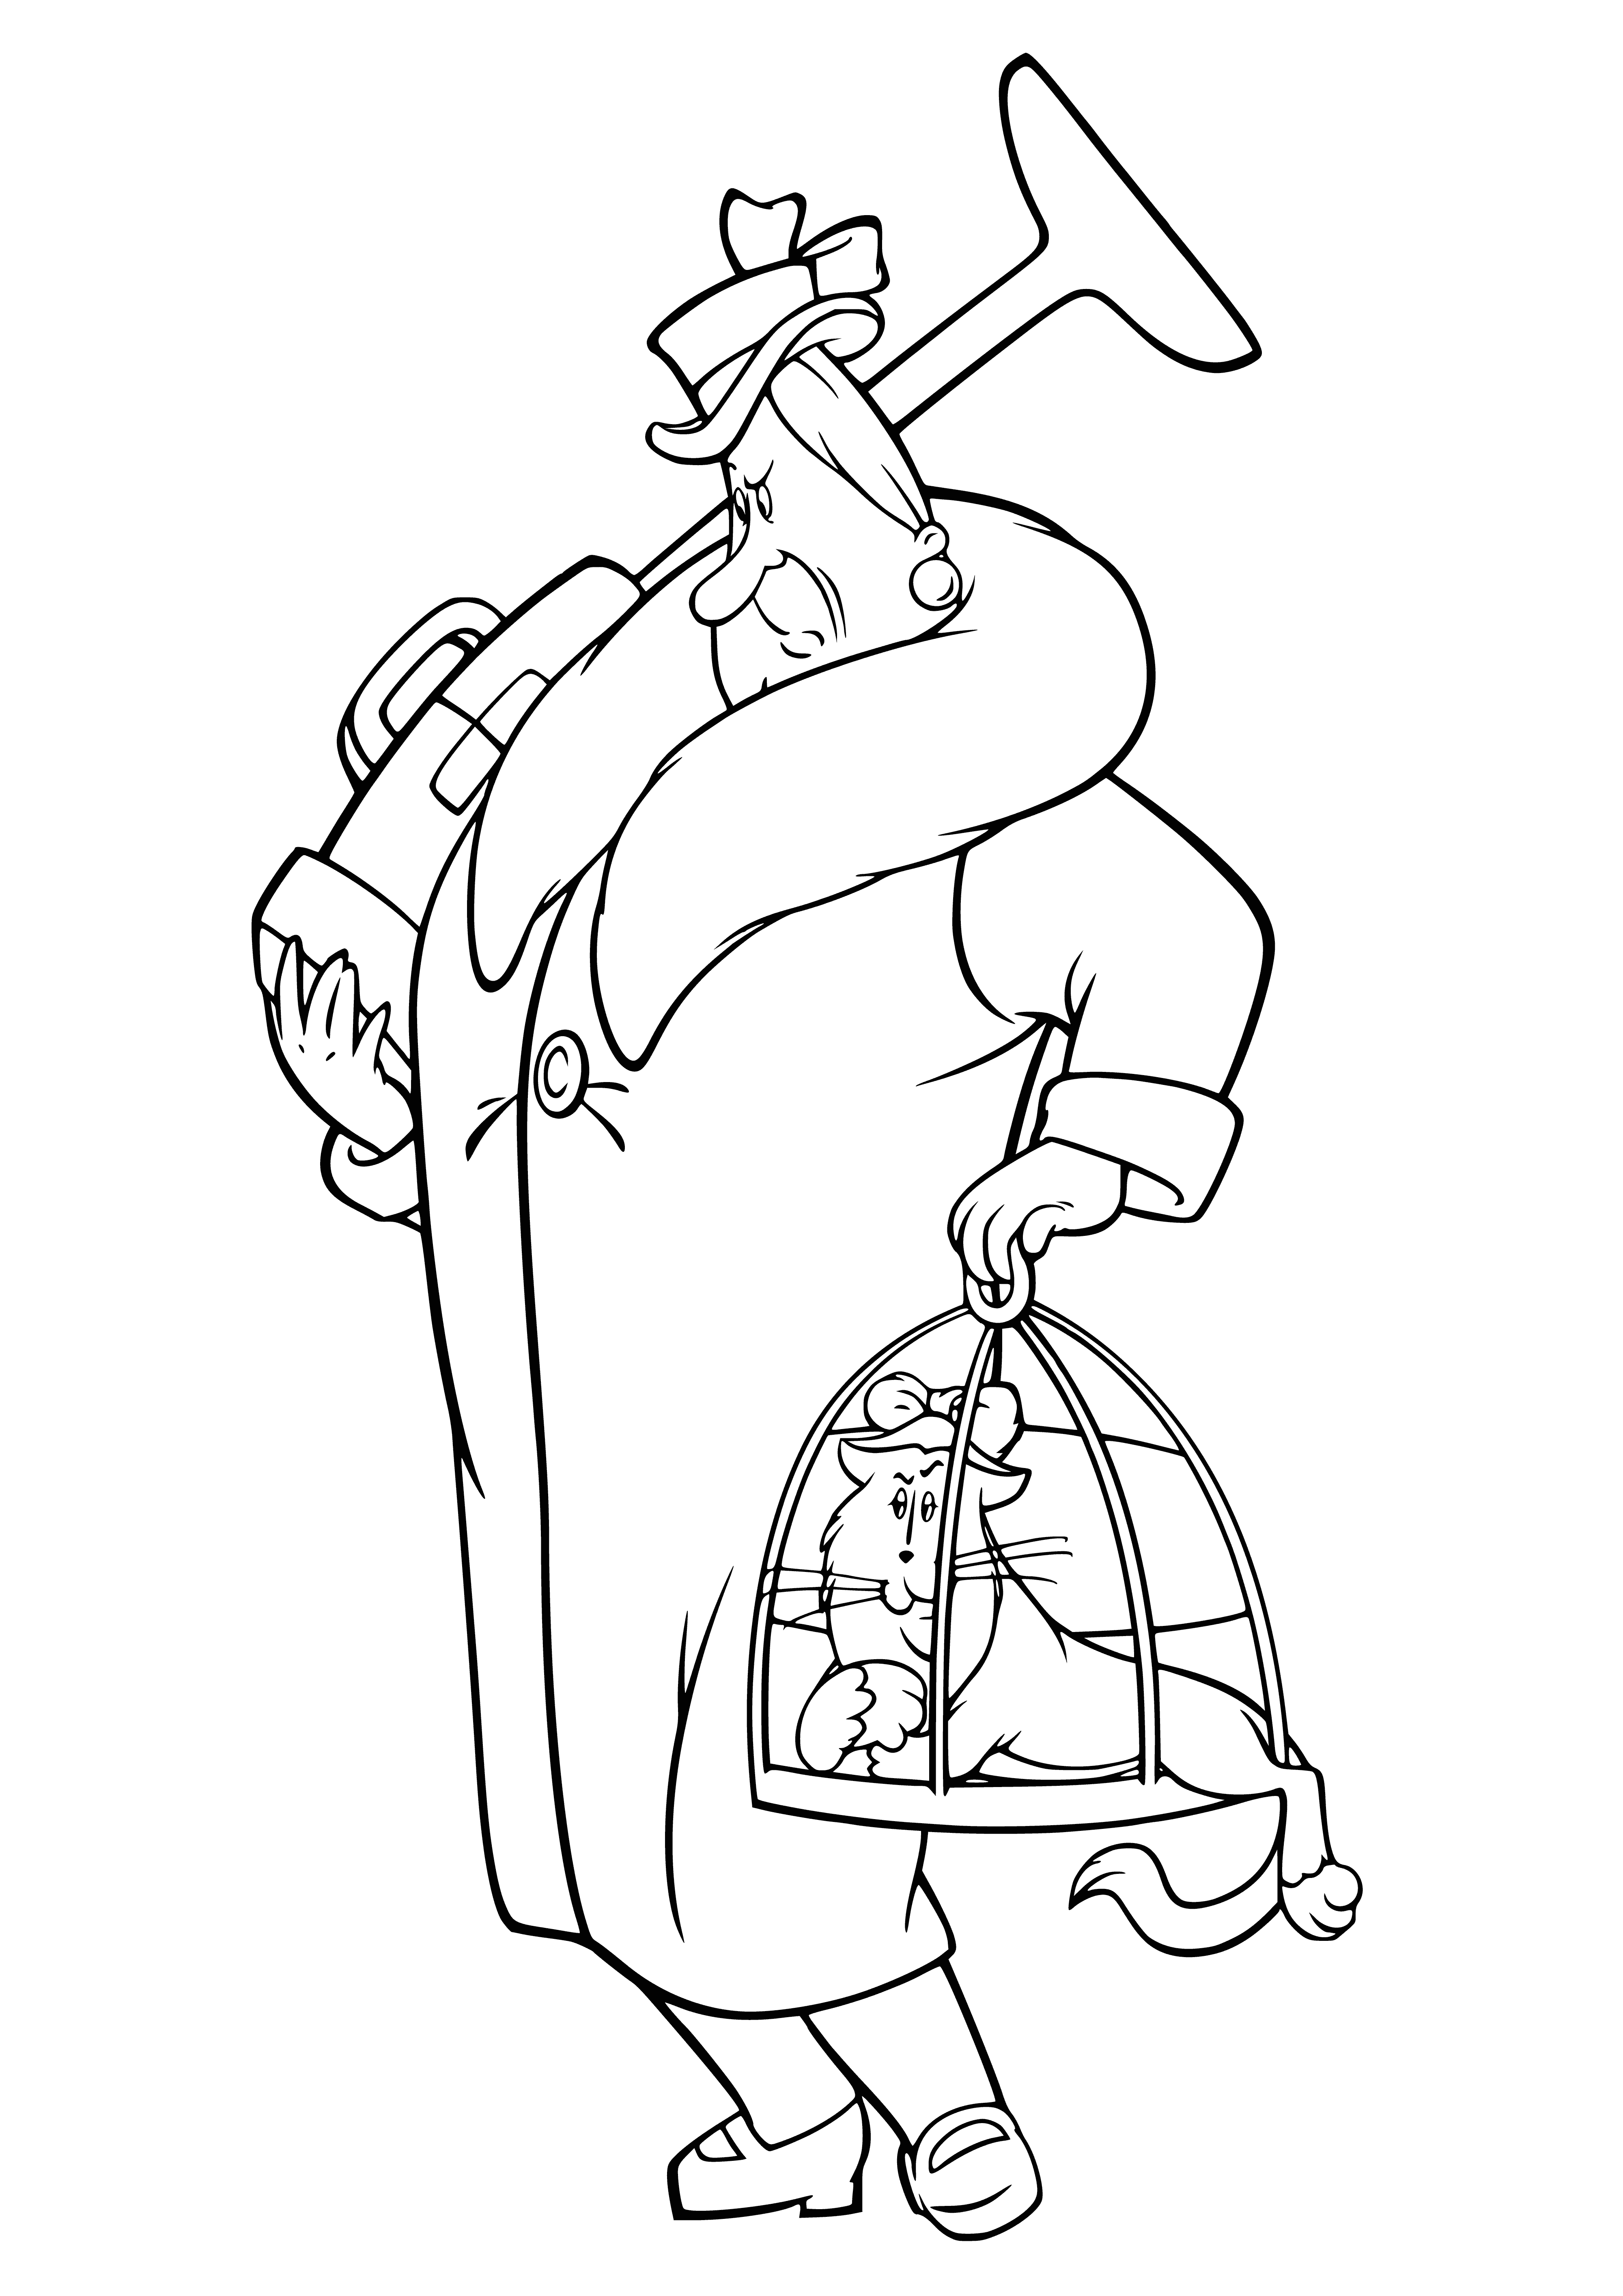 coloring page: Kid and Freken Bock in room full of plants, window letting in sun. Freken wearing dress and scarf. Kid seated with arms crossed.